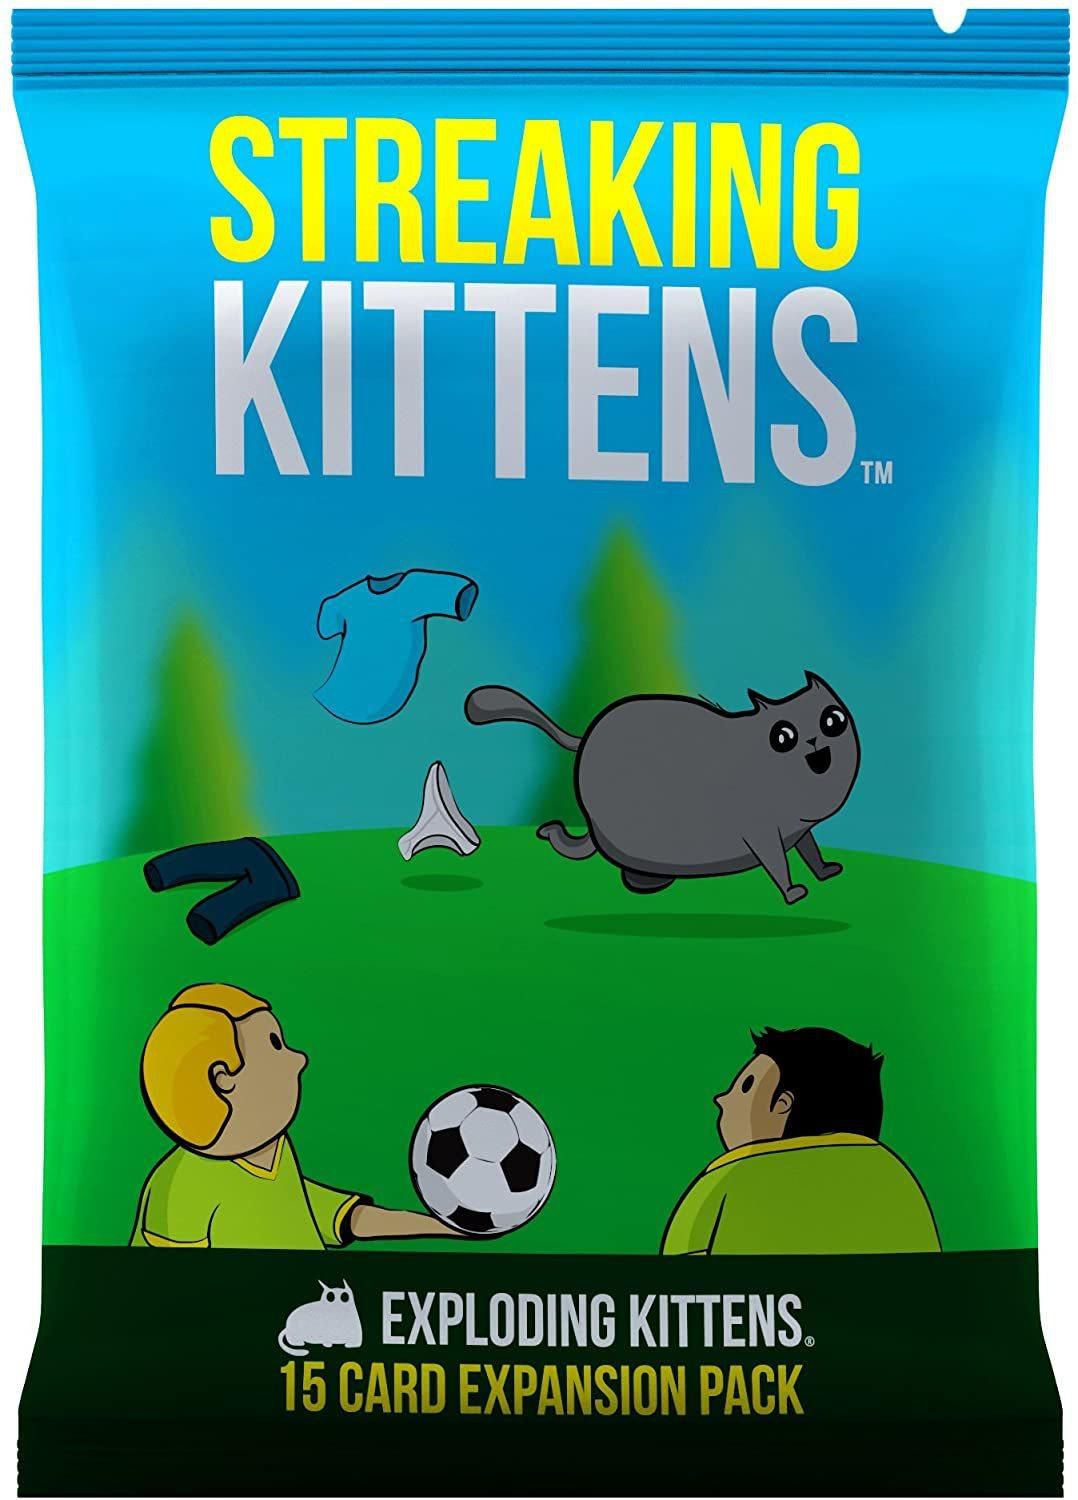 Doreen Streaking Kittens: This Is The Second Expansion of Exploding Kittens